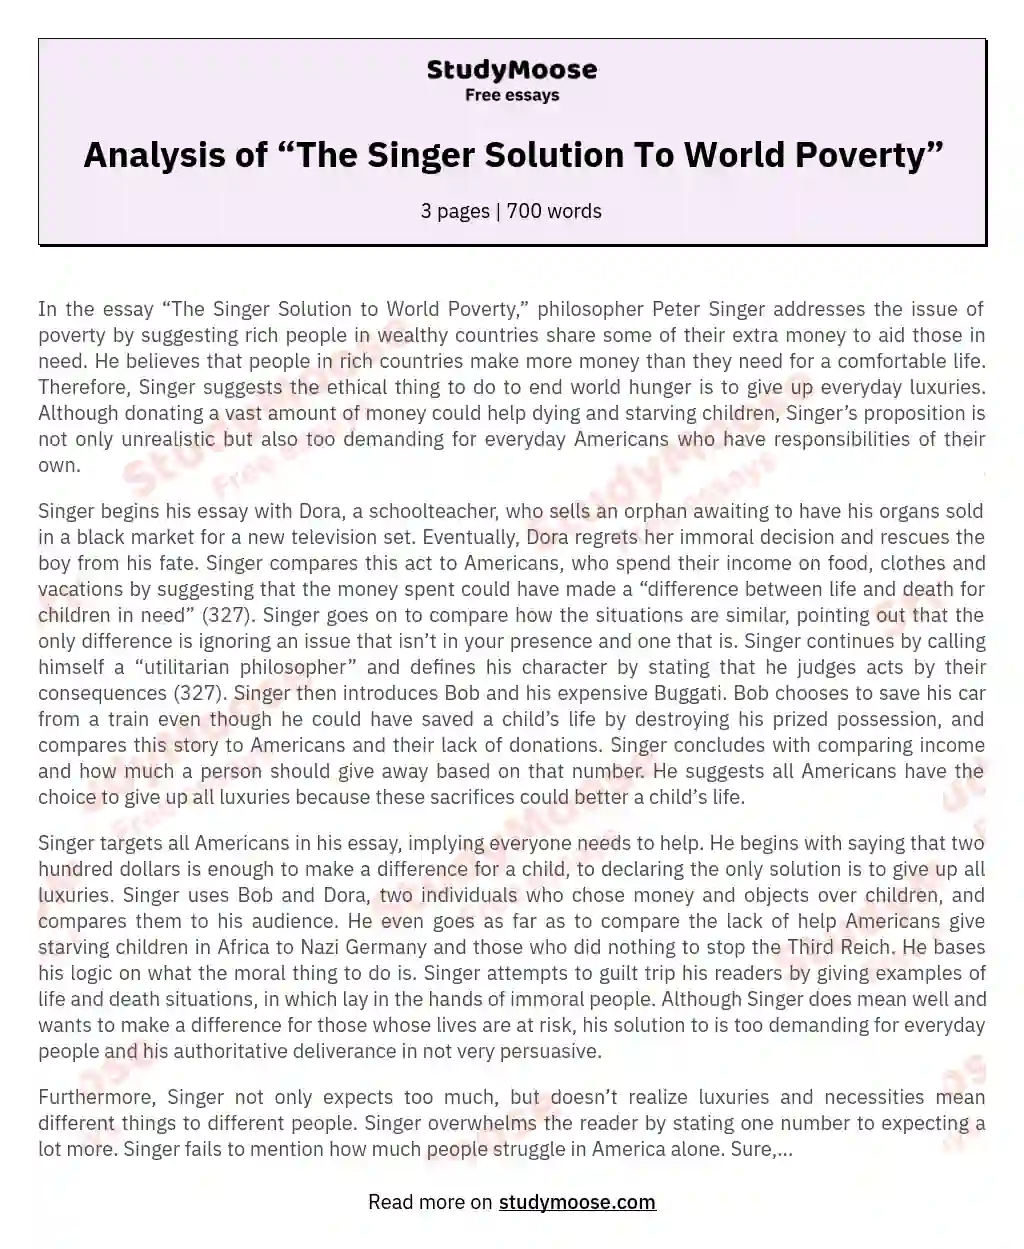 Analysis of “The Singer Solution To World Poverty” essay